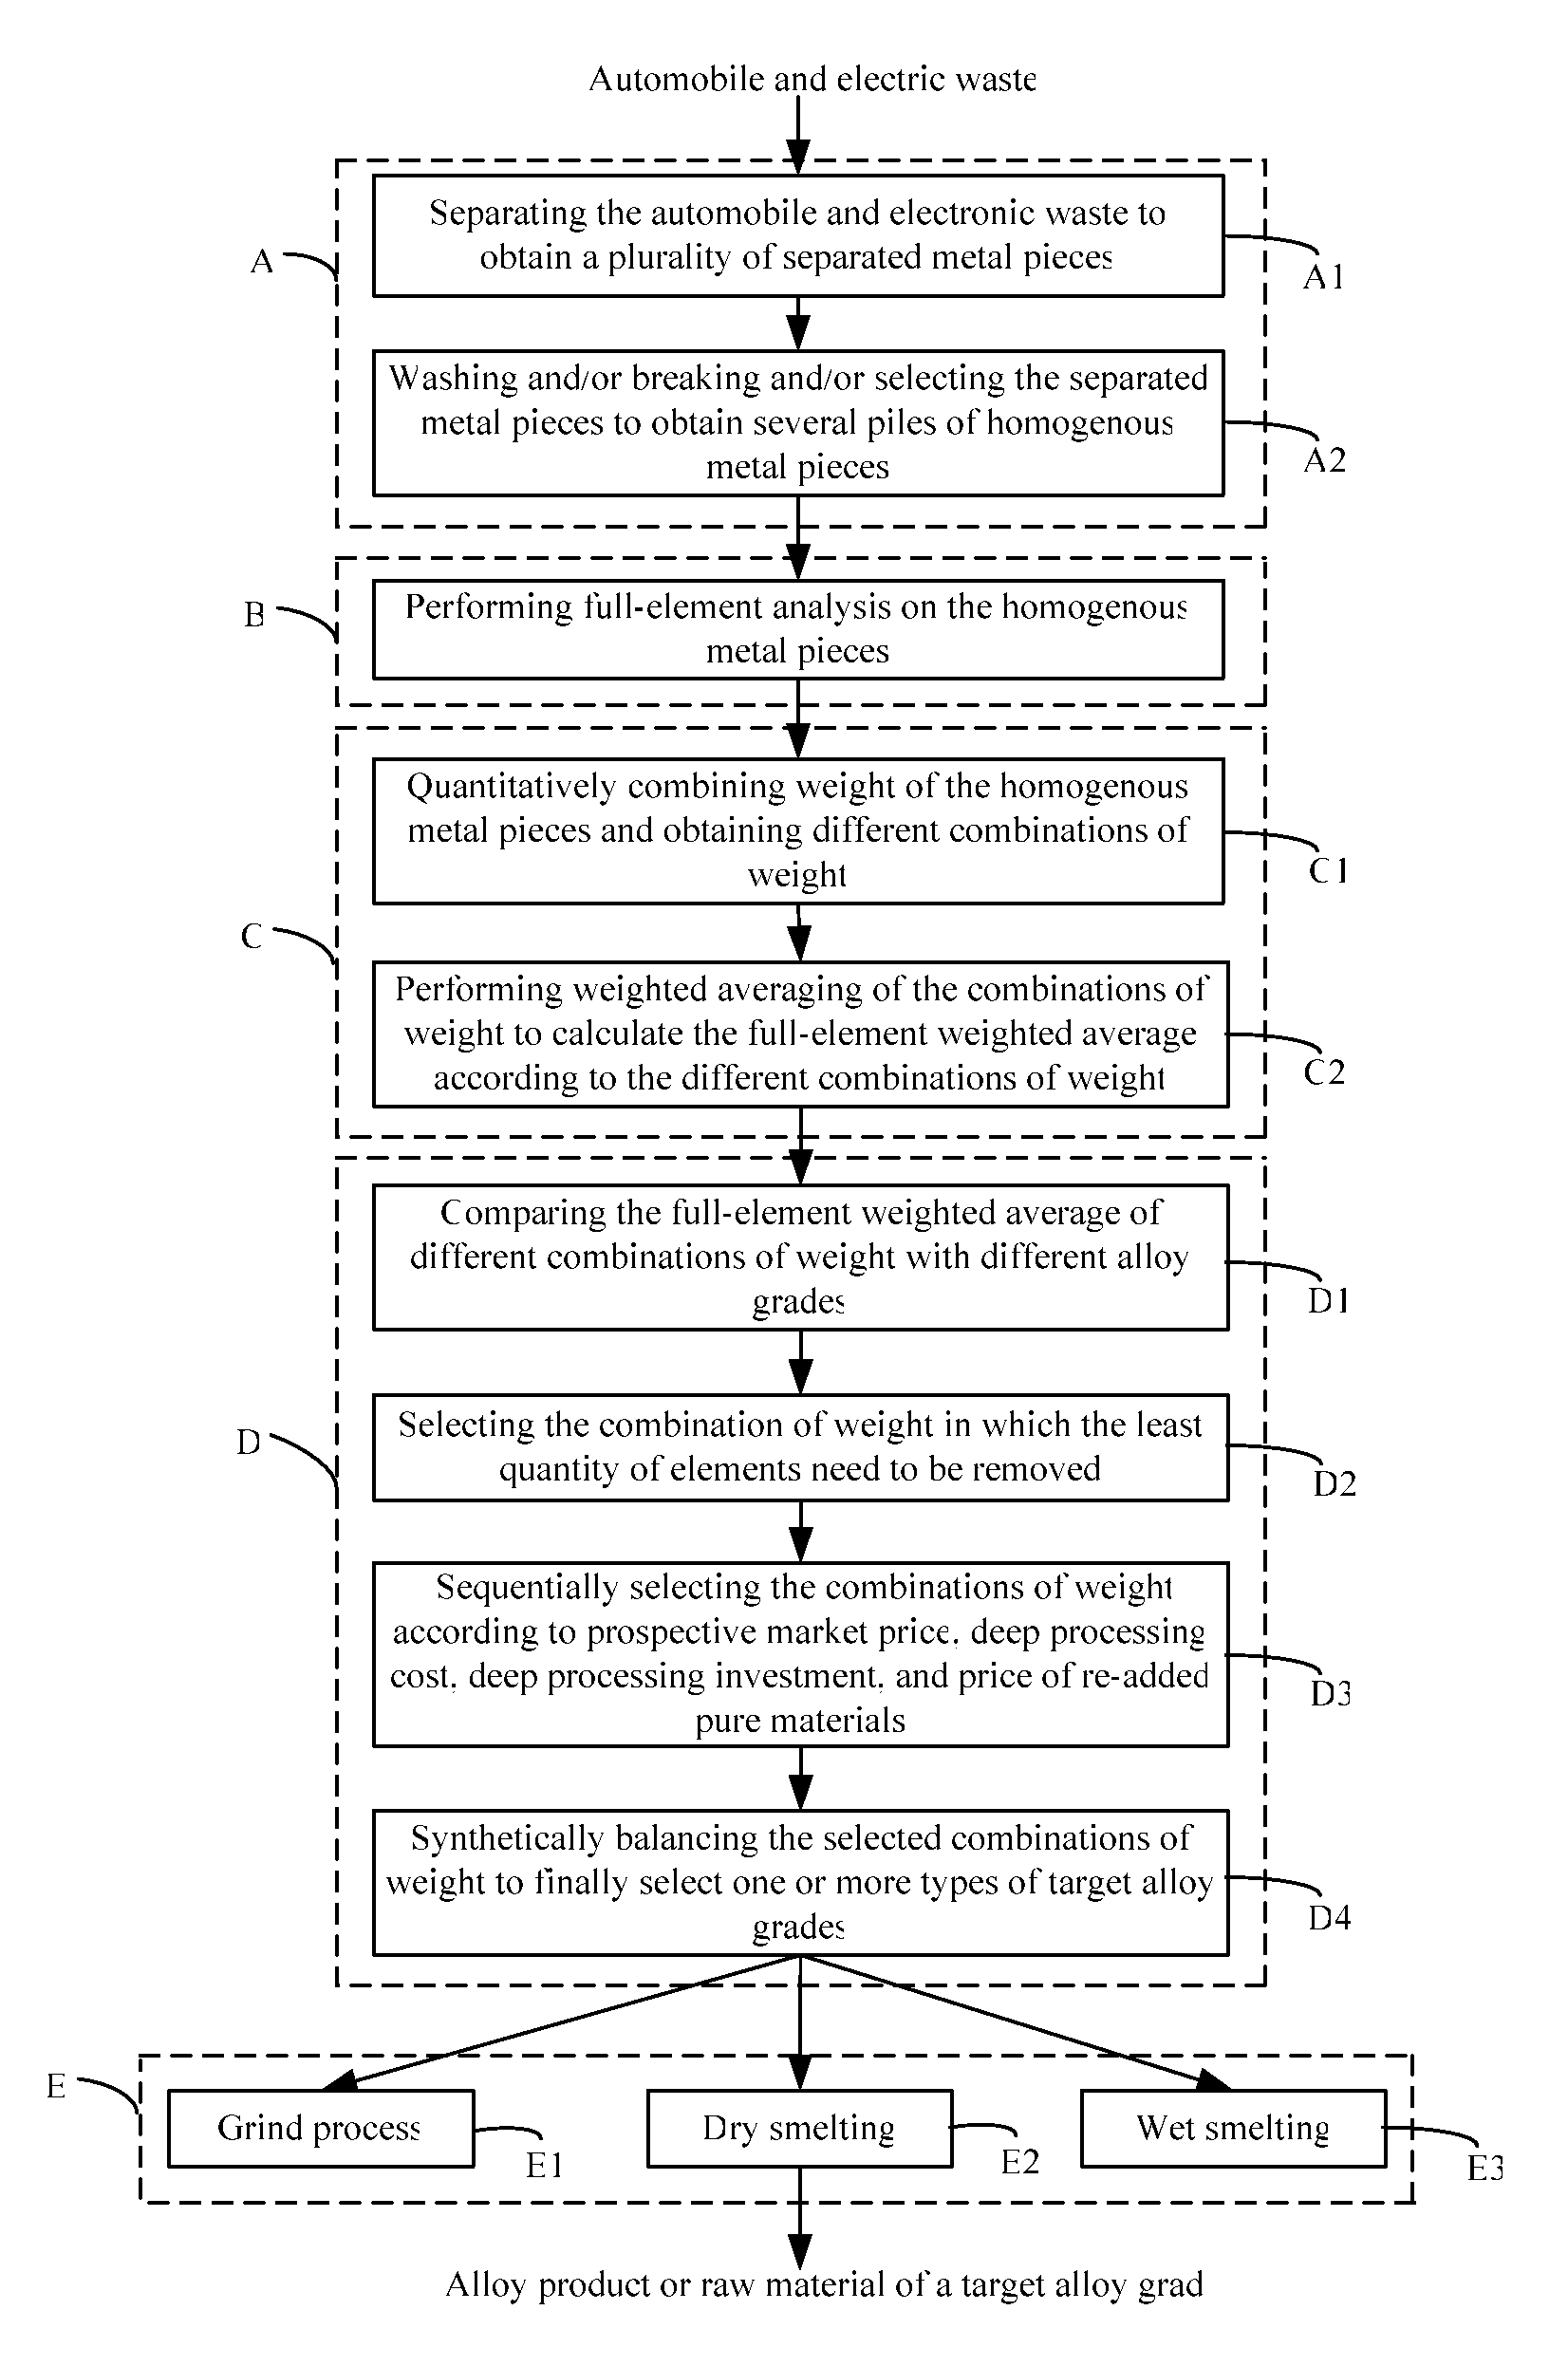 Methods for recovering metals from automobile scrap and electronic waste